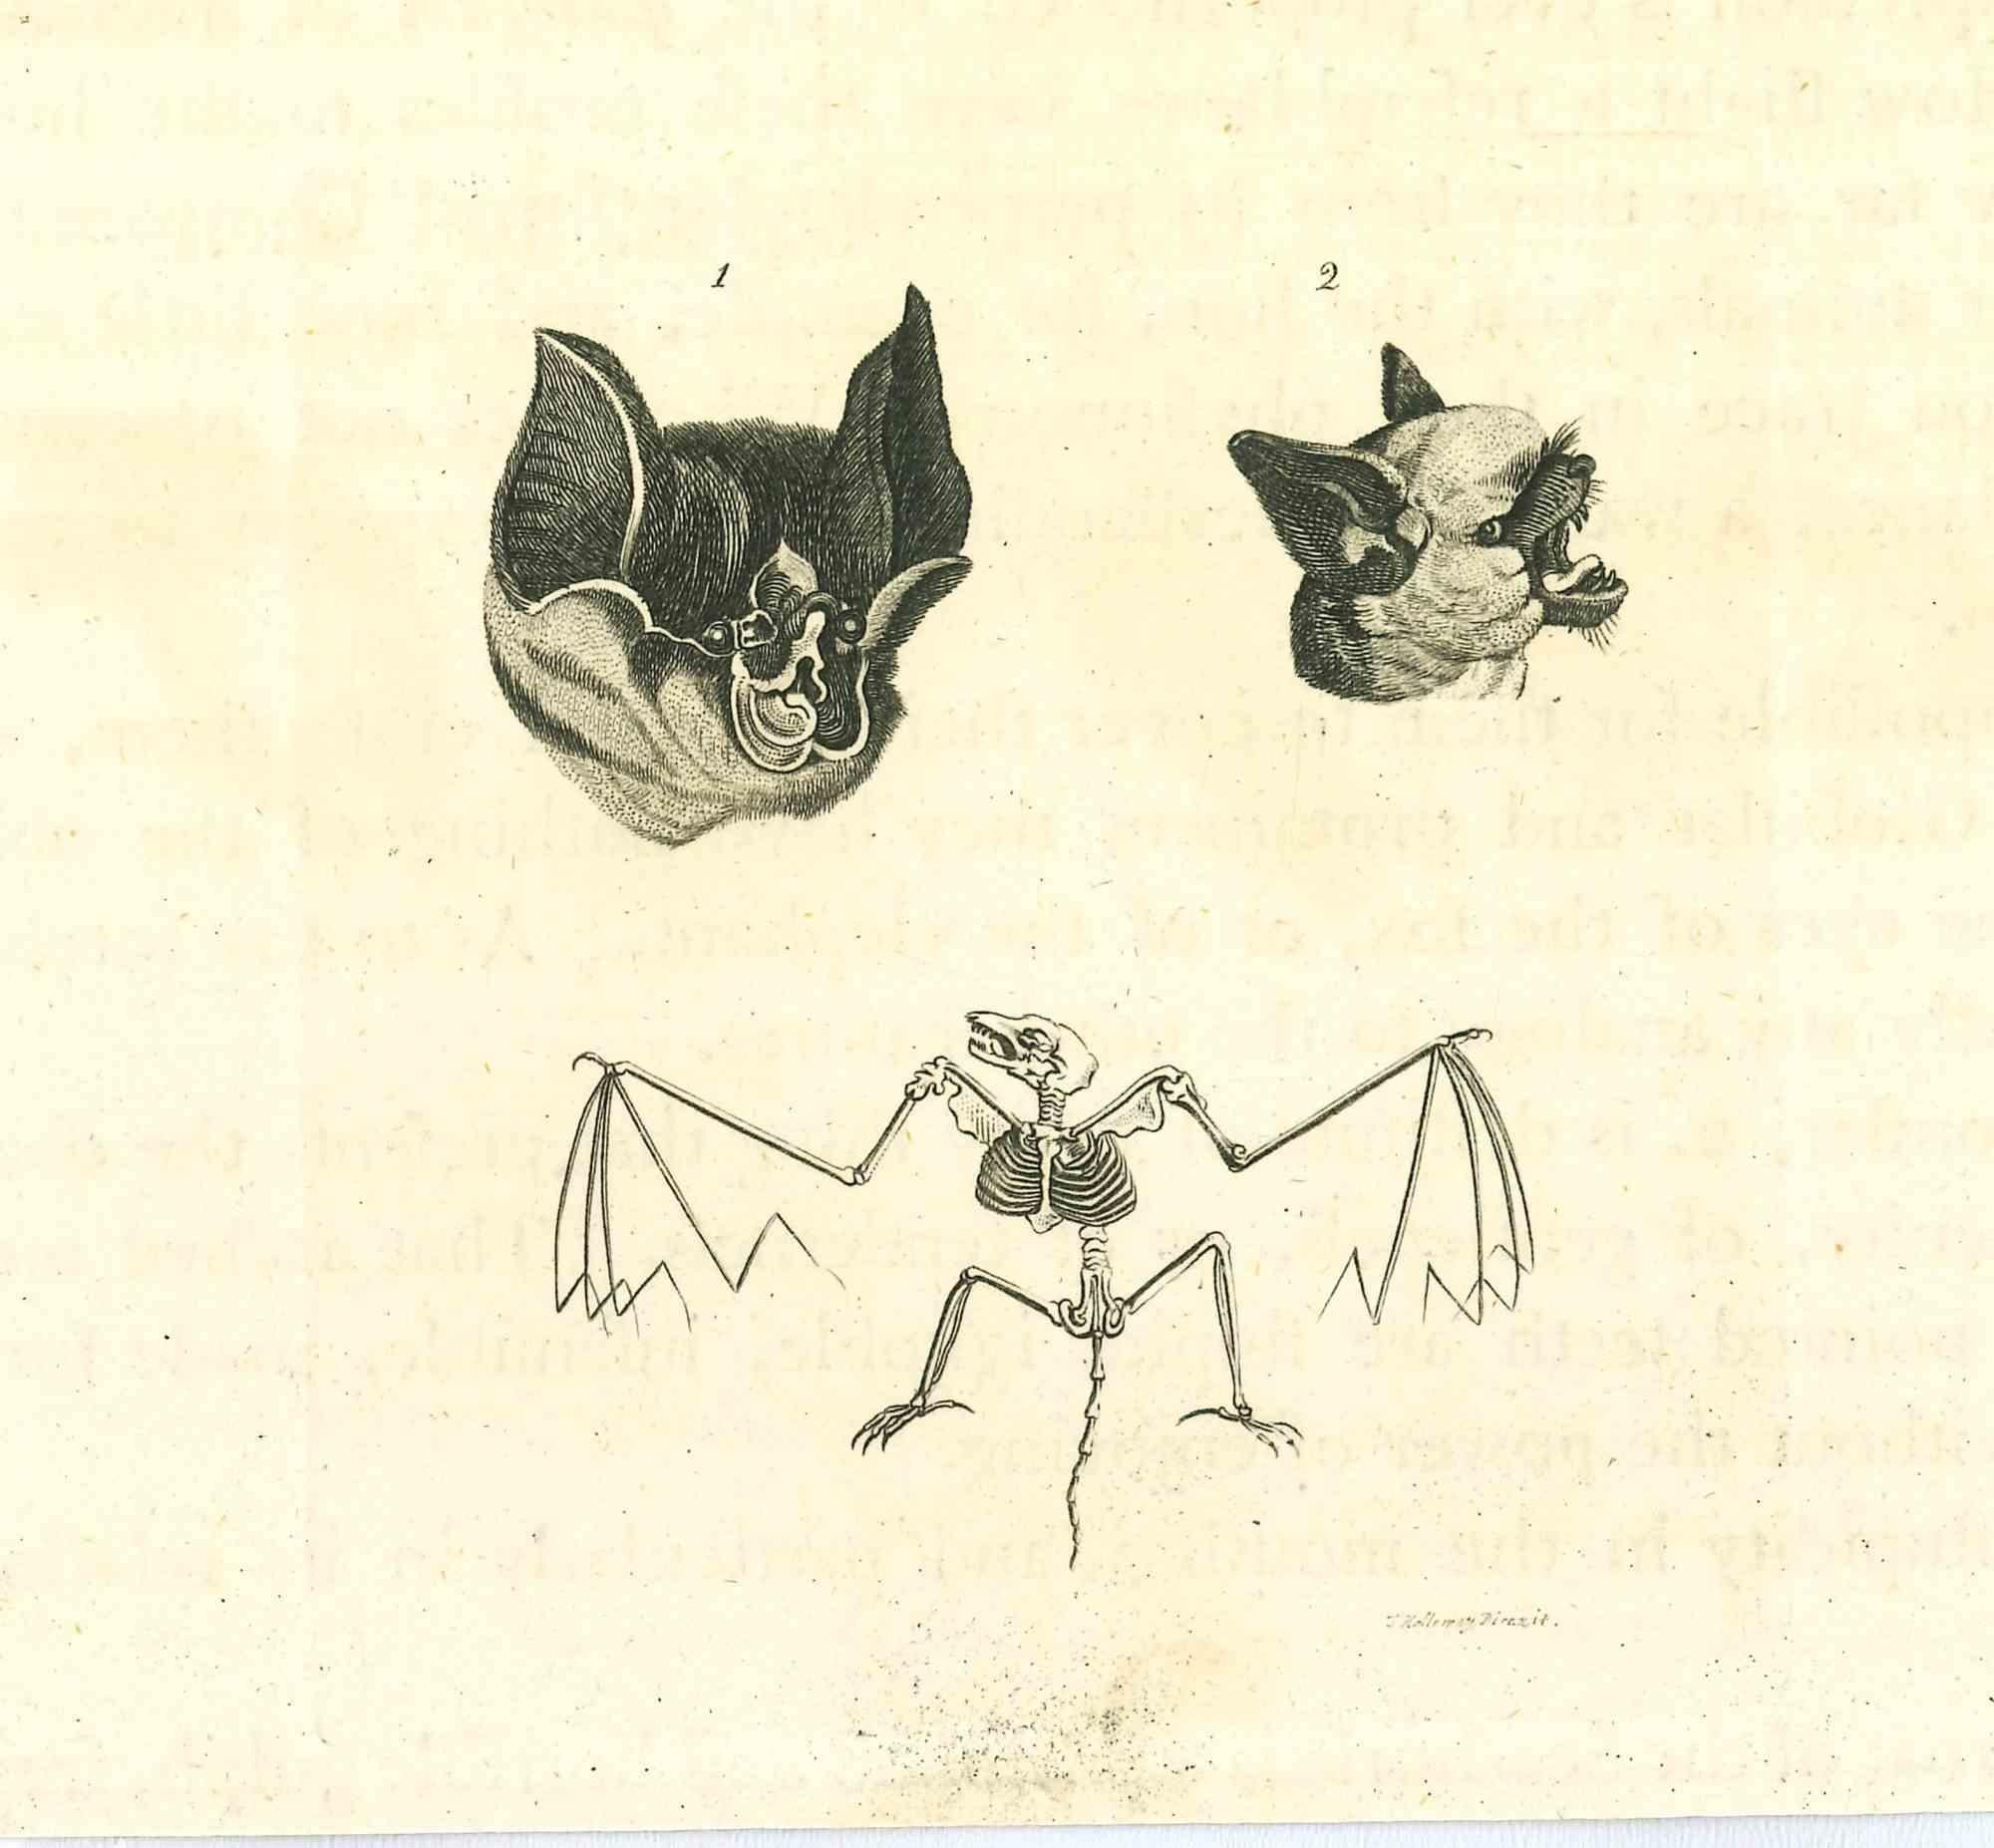 The Physiognomy - The Bats - Original Etching by Thomas Holloway - 1810